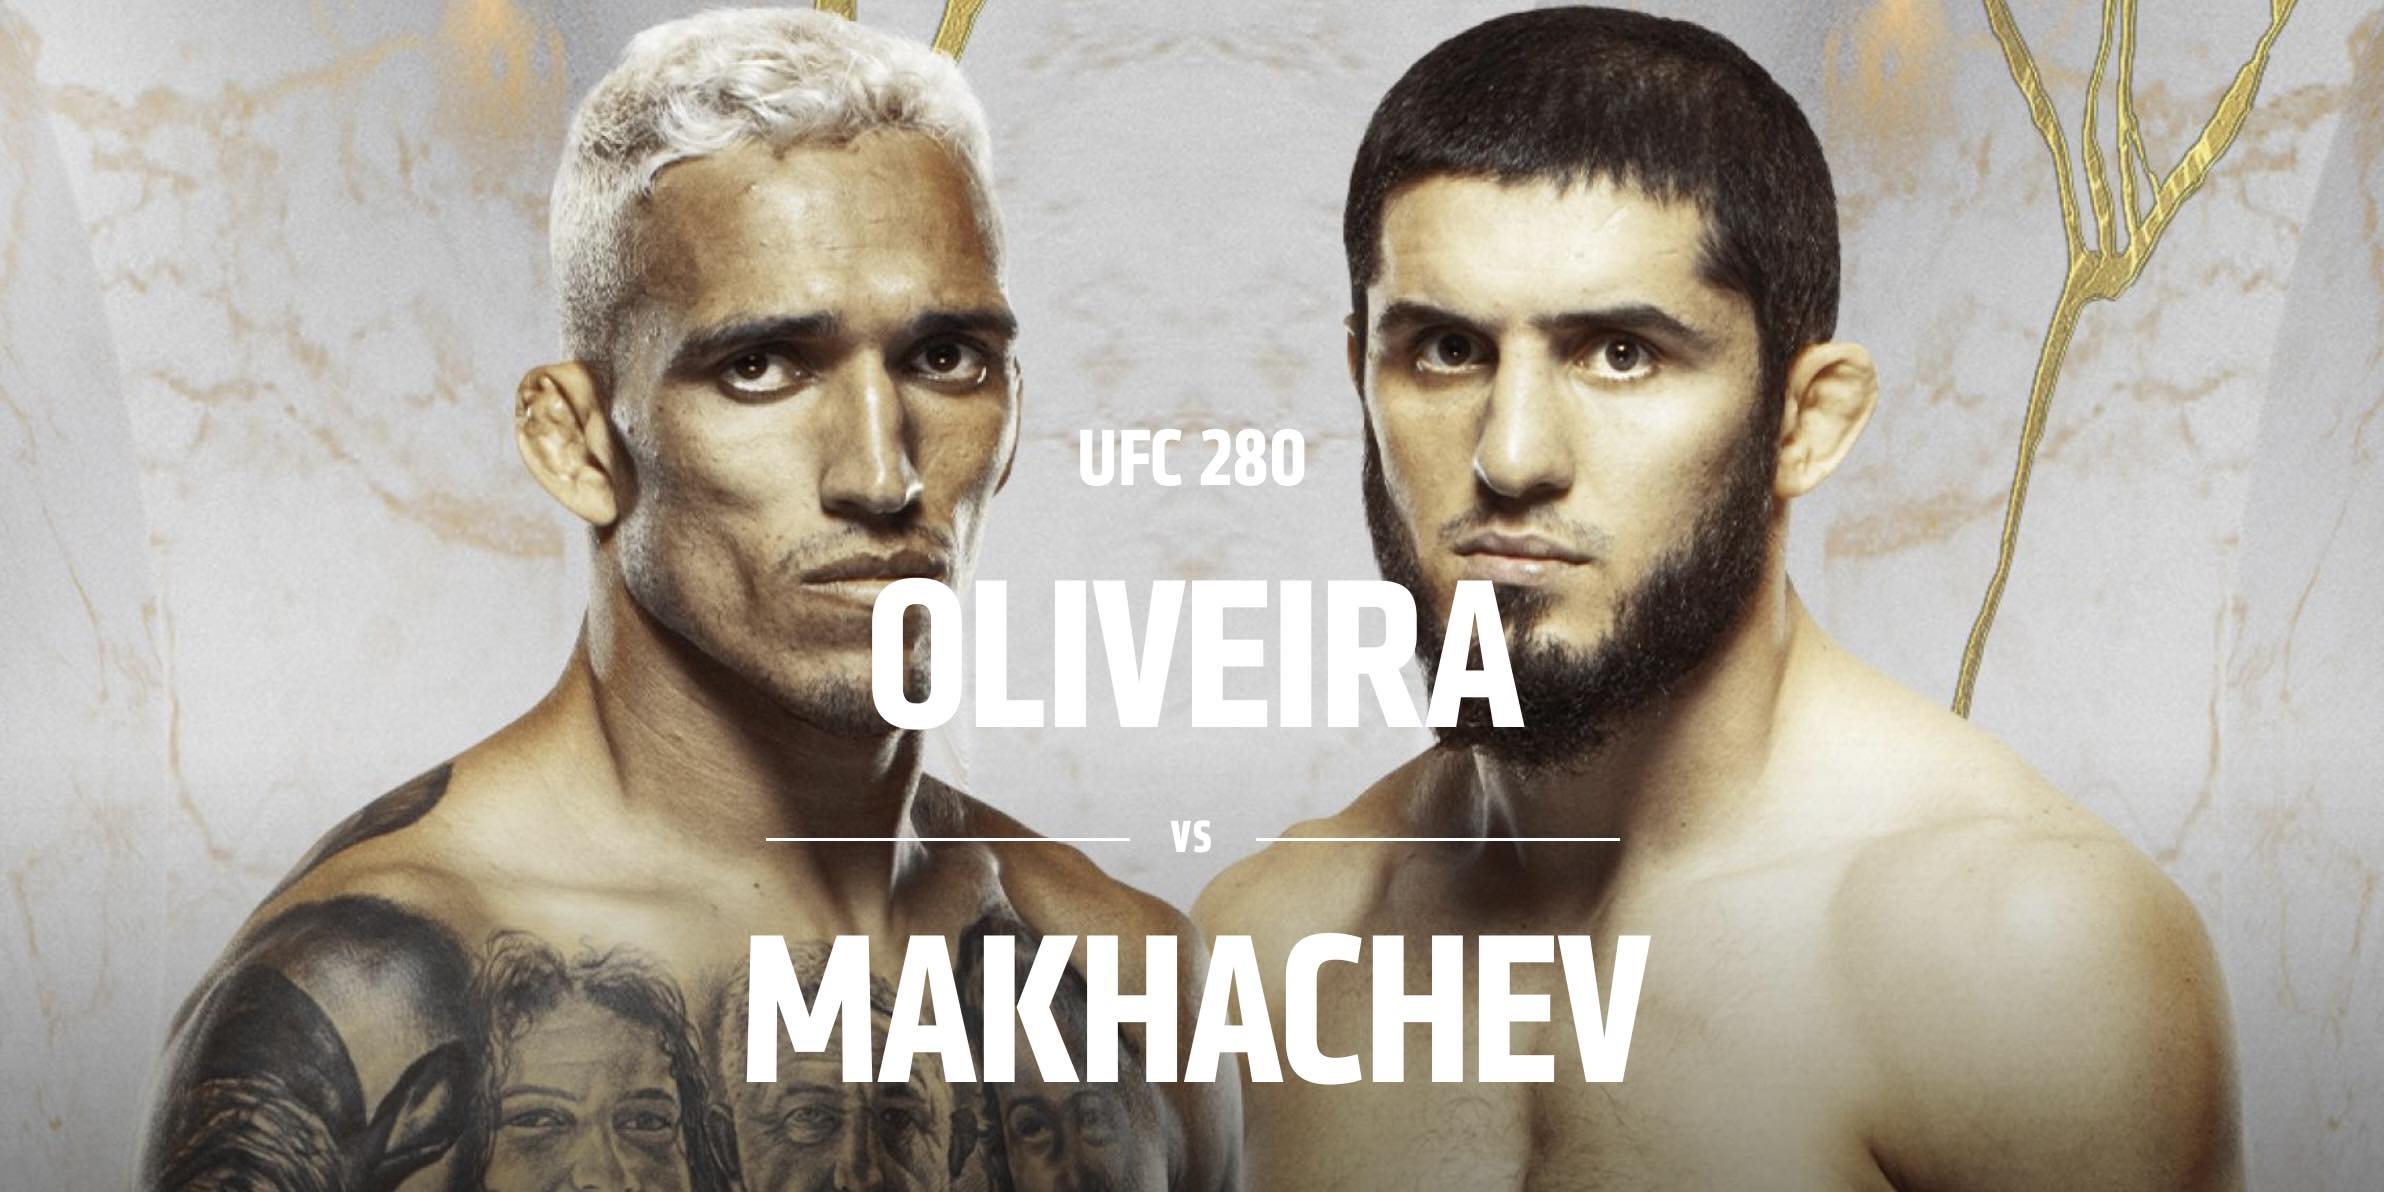 How to watch UFC 280 Oliveira vs Makhachev